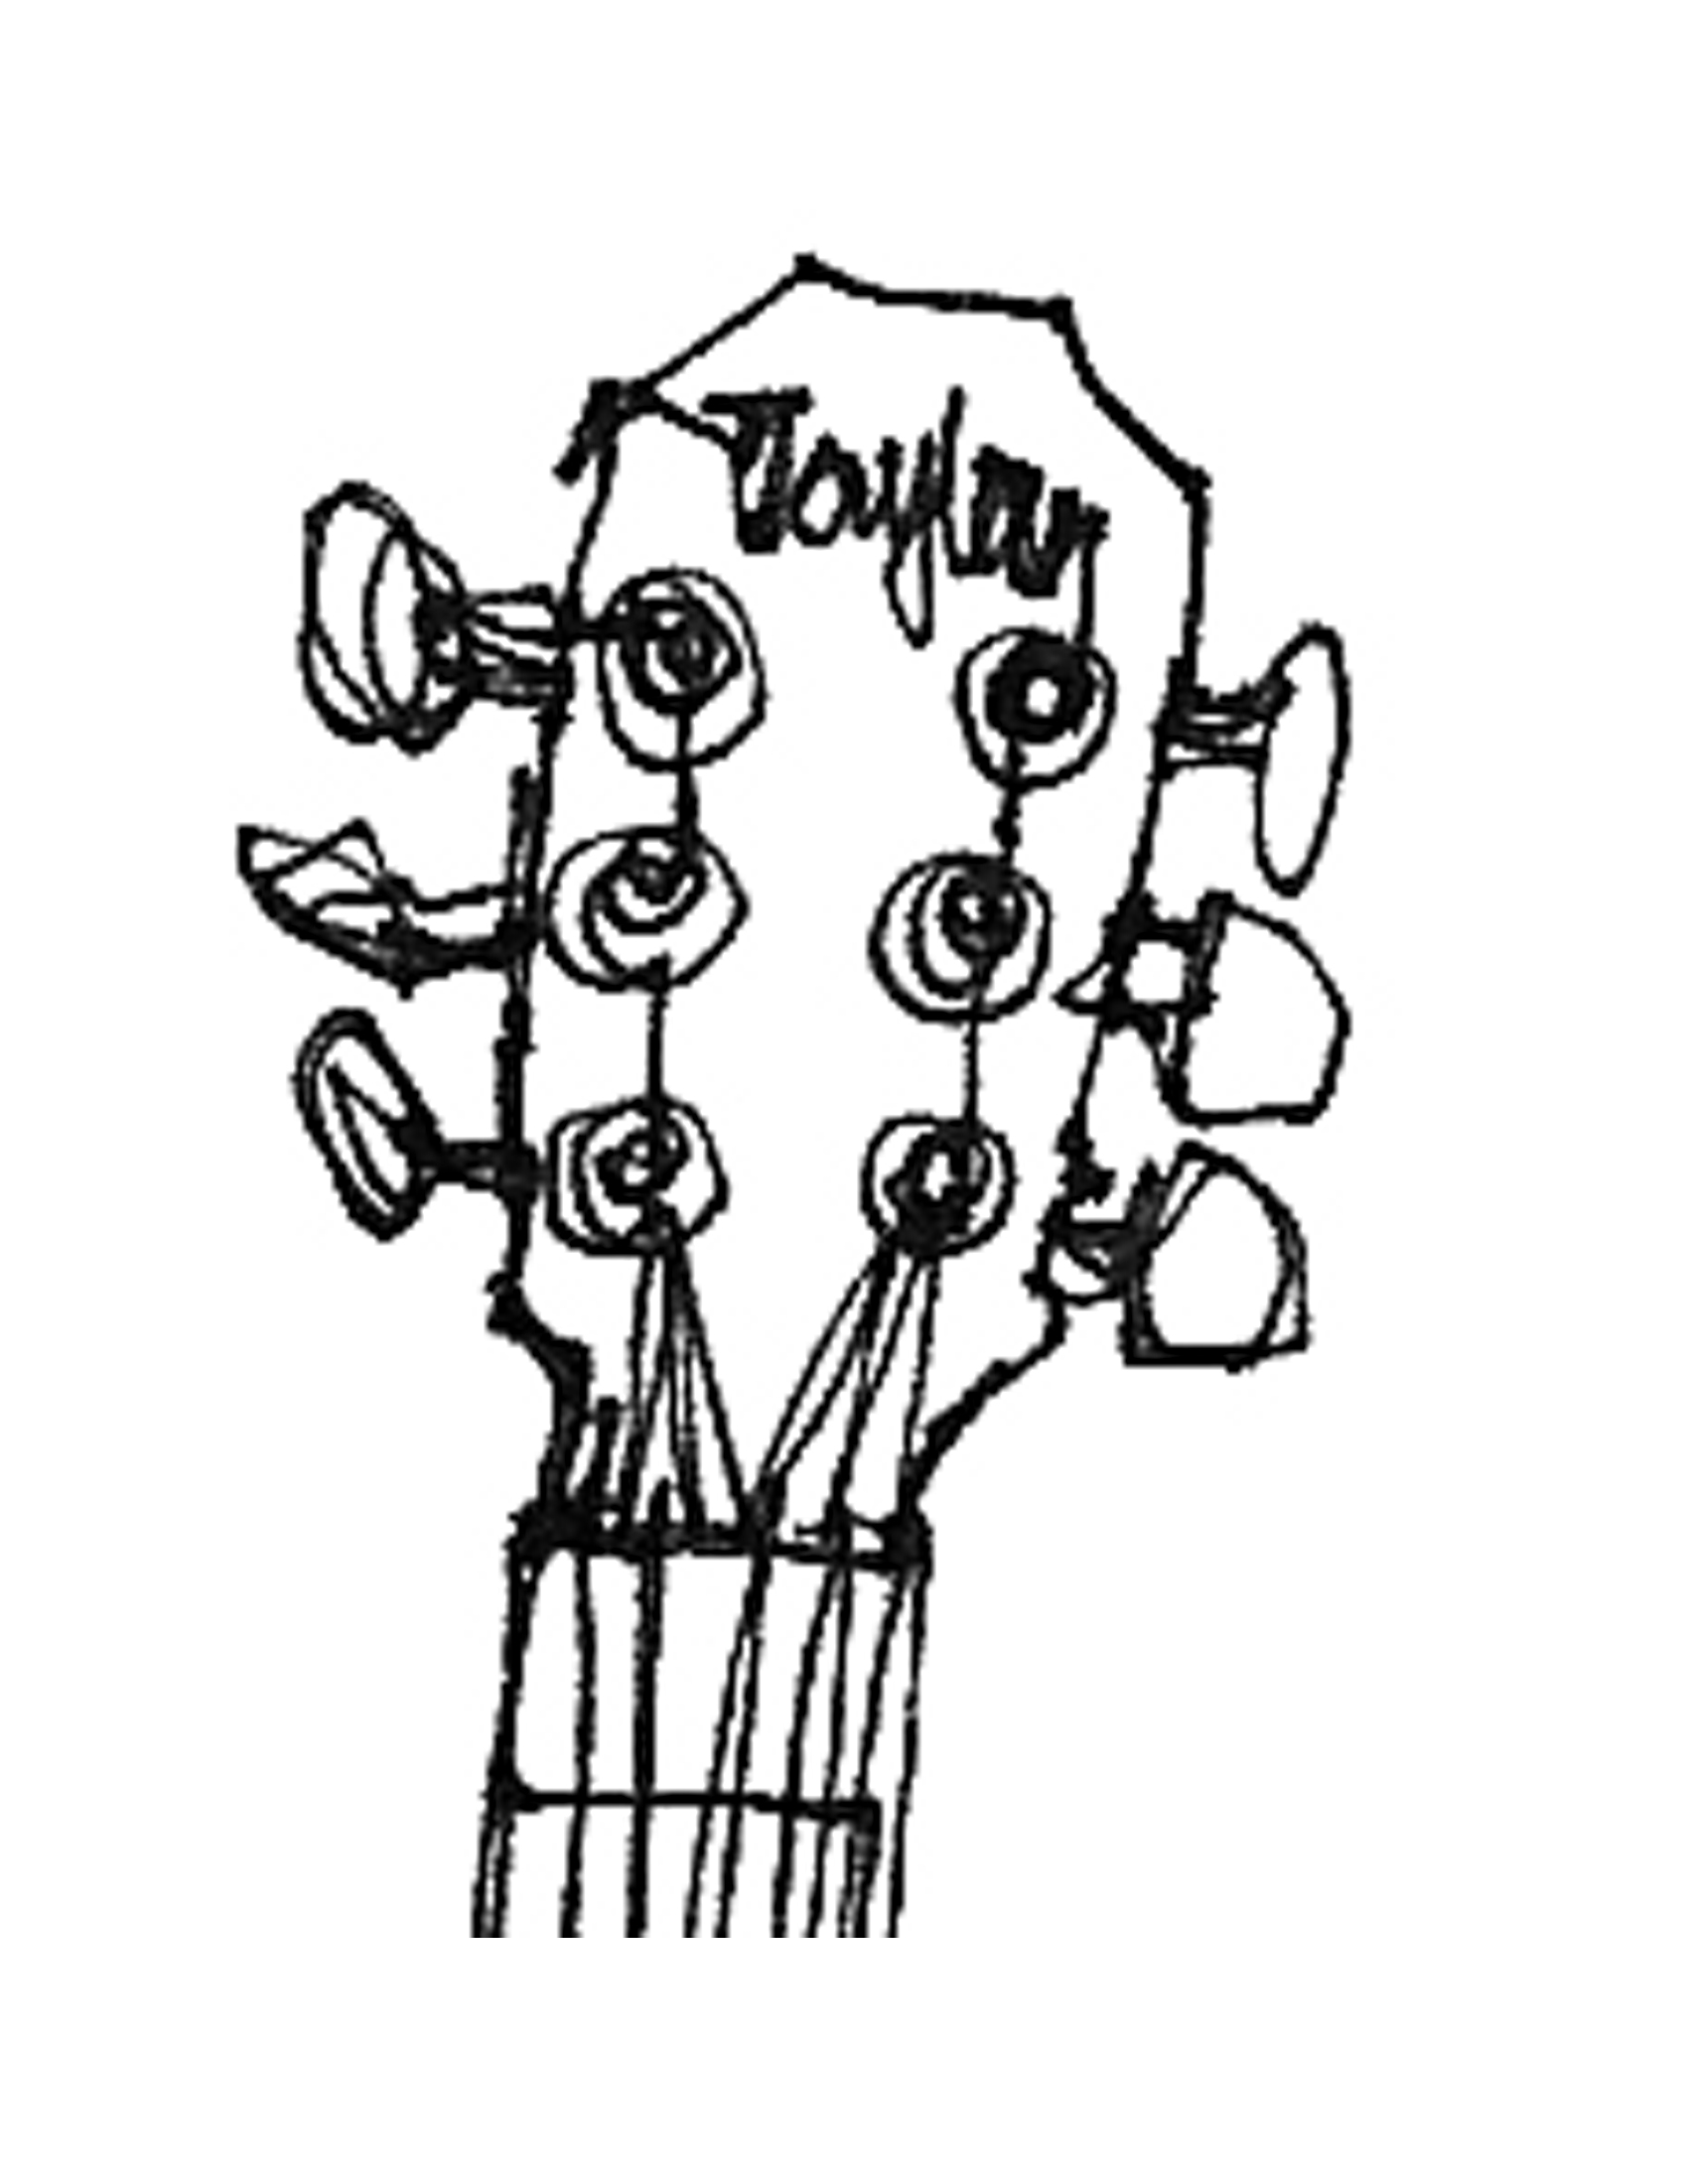 Guitar Line Drawing - ClipArt Best